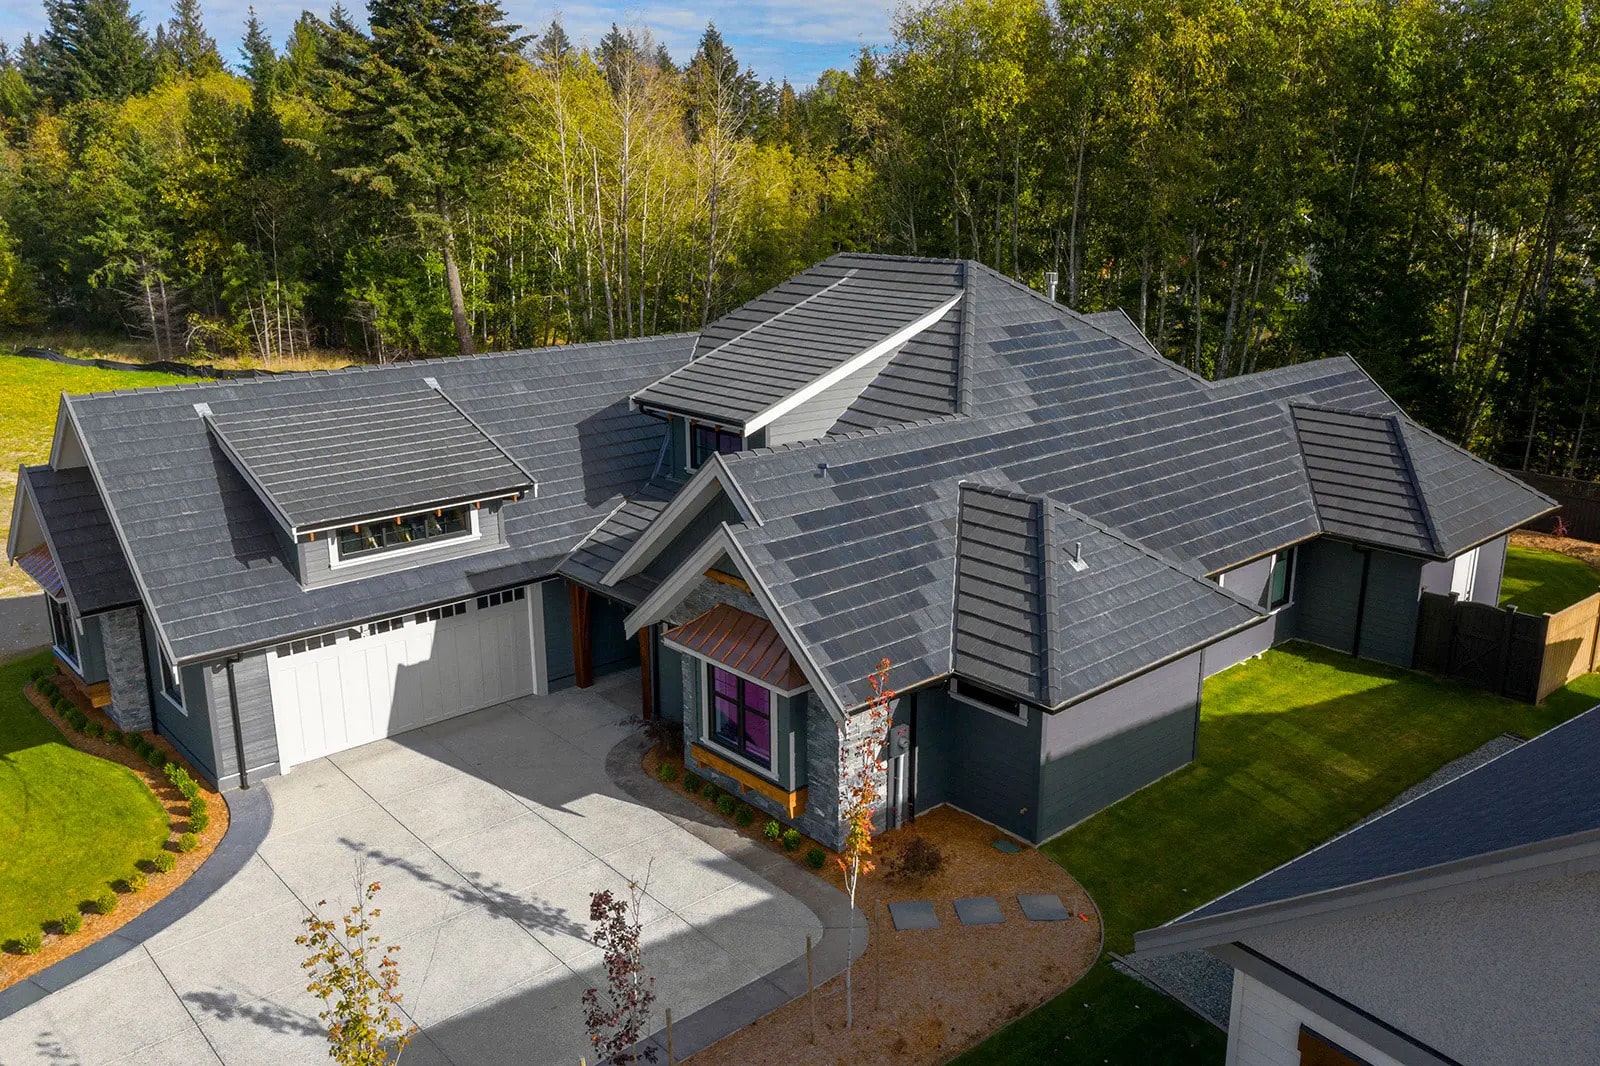 How Are Solar Tiles and Windows Lending a Designer Touch to Sustainable Homes?